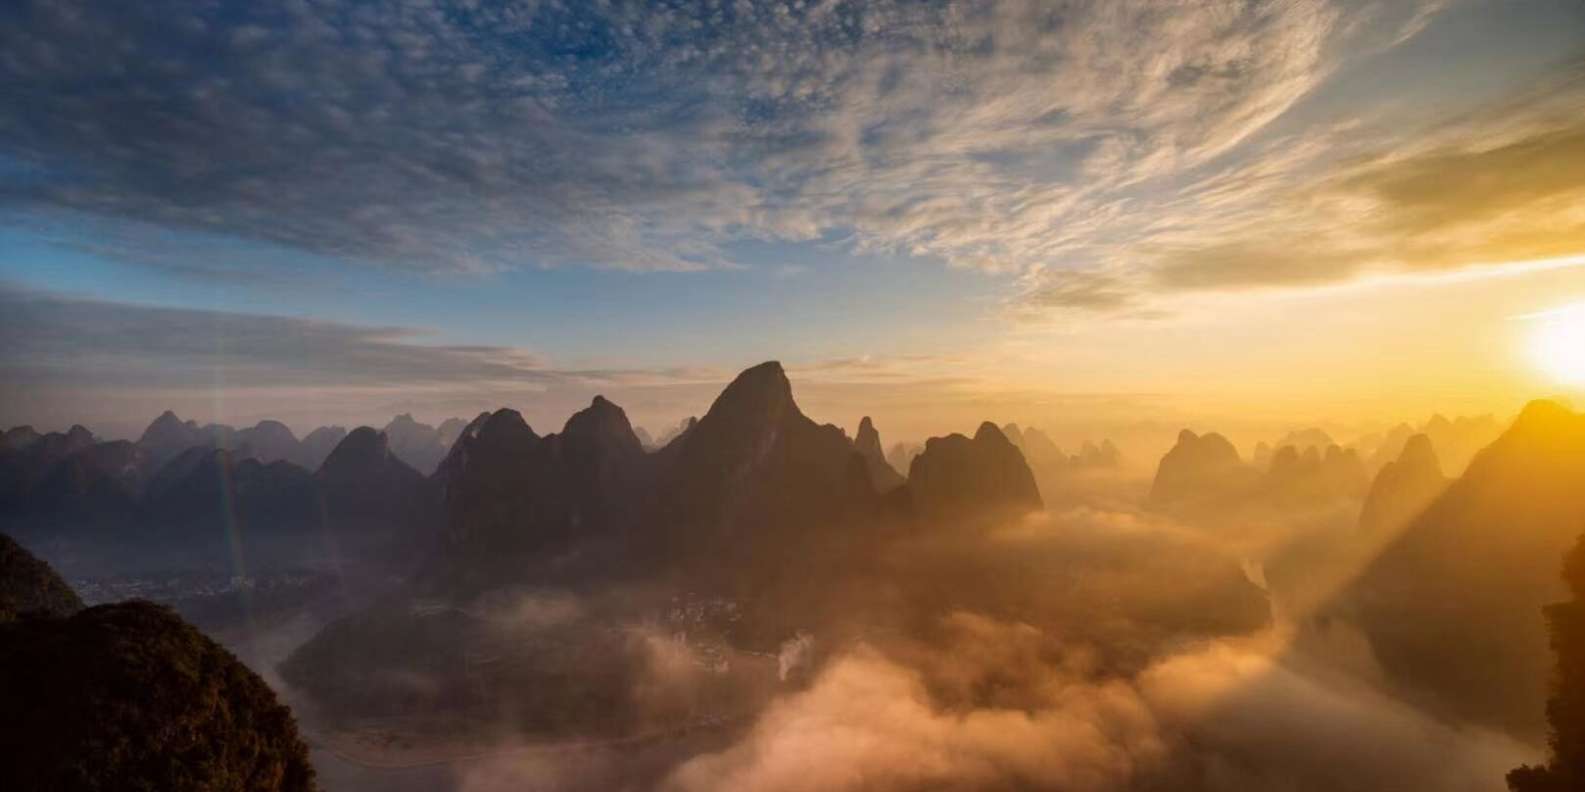 What to do in Yangshuo